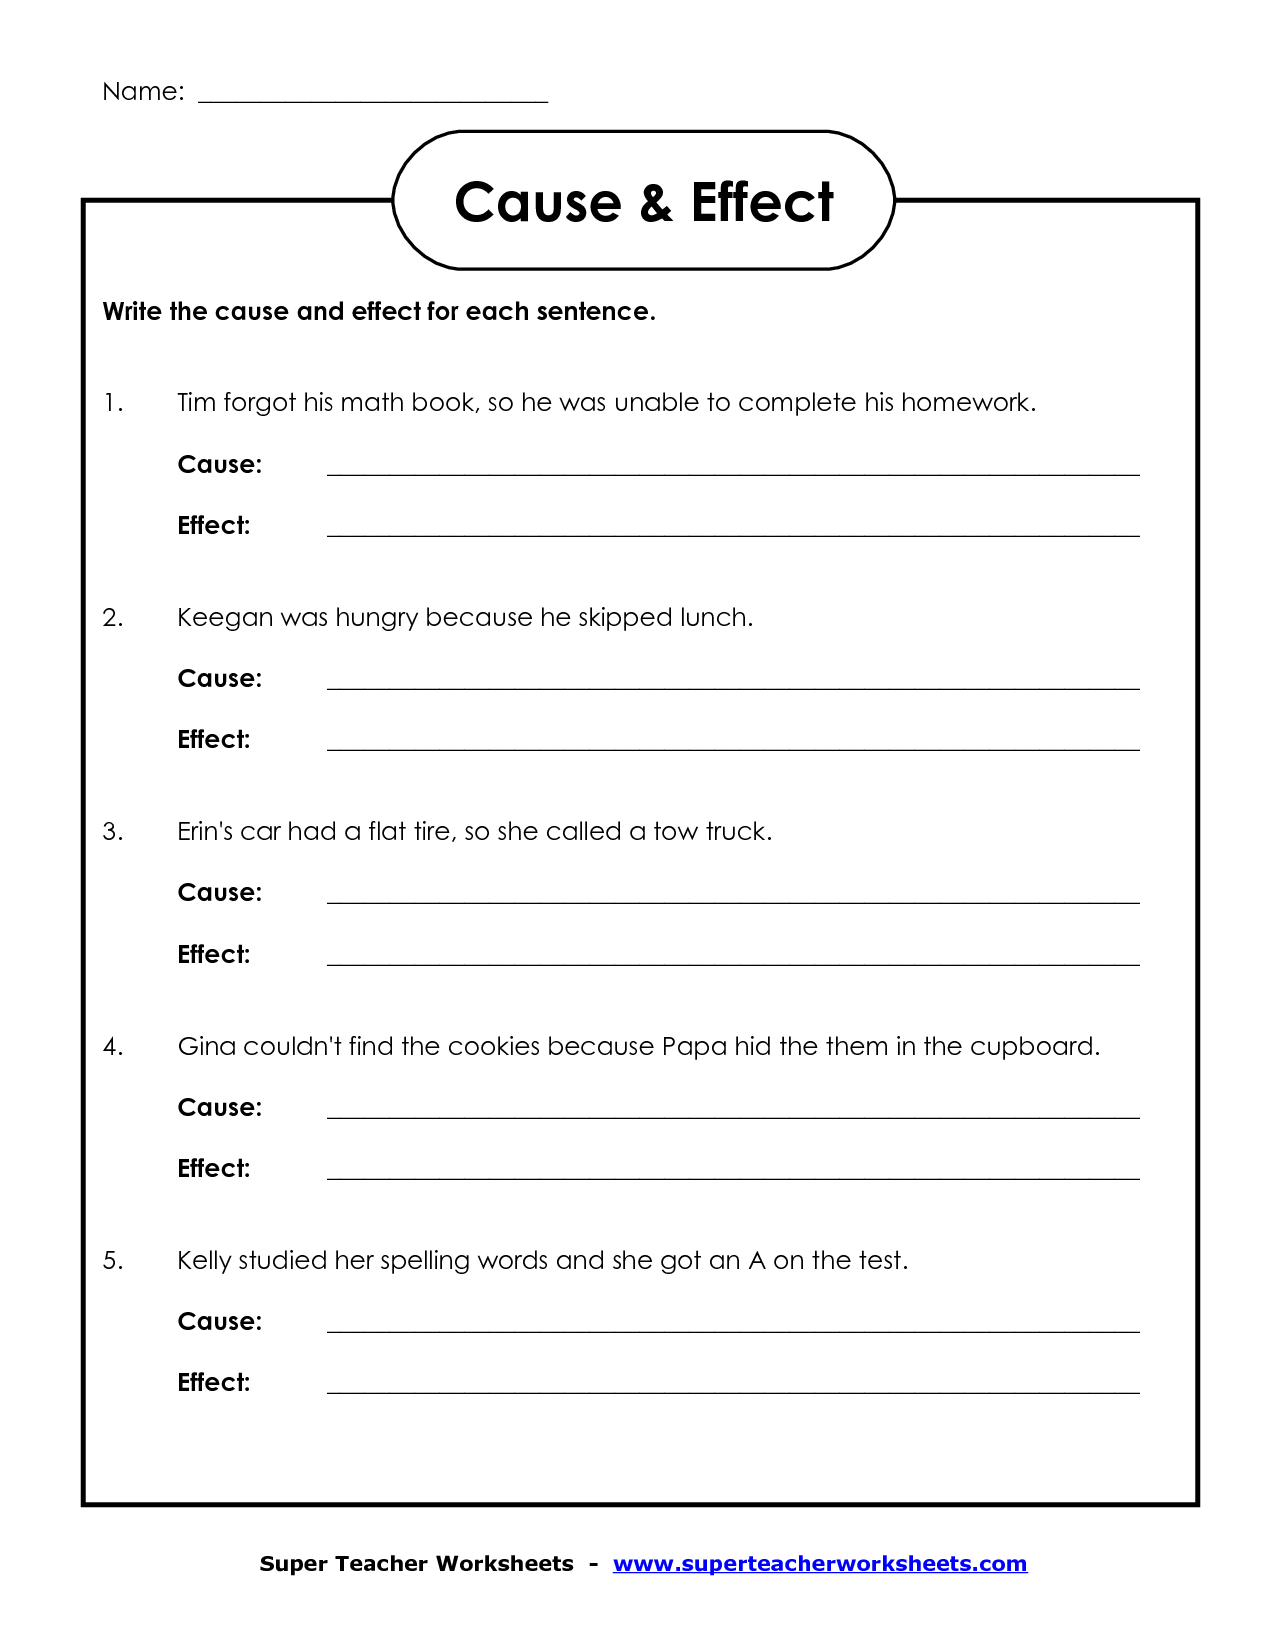 free-printable-cause-and-effect-worksheets